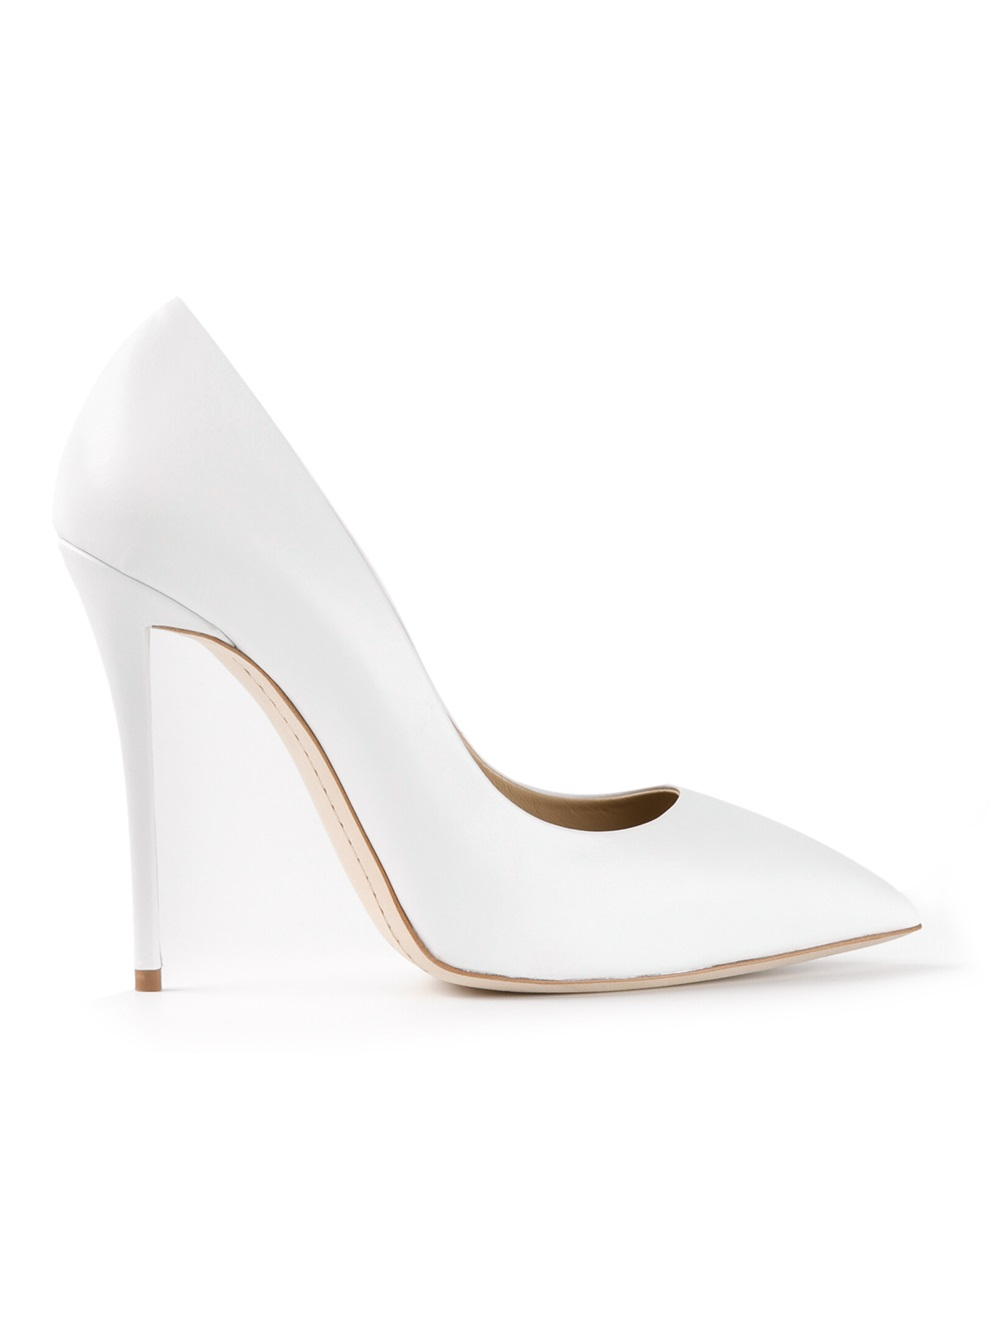 Giuseppe Zanotti Pointed Toe Pumps in White | Lyst